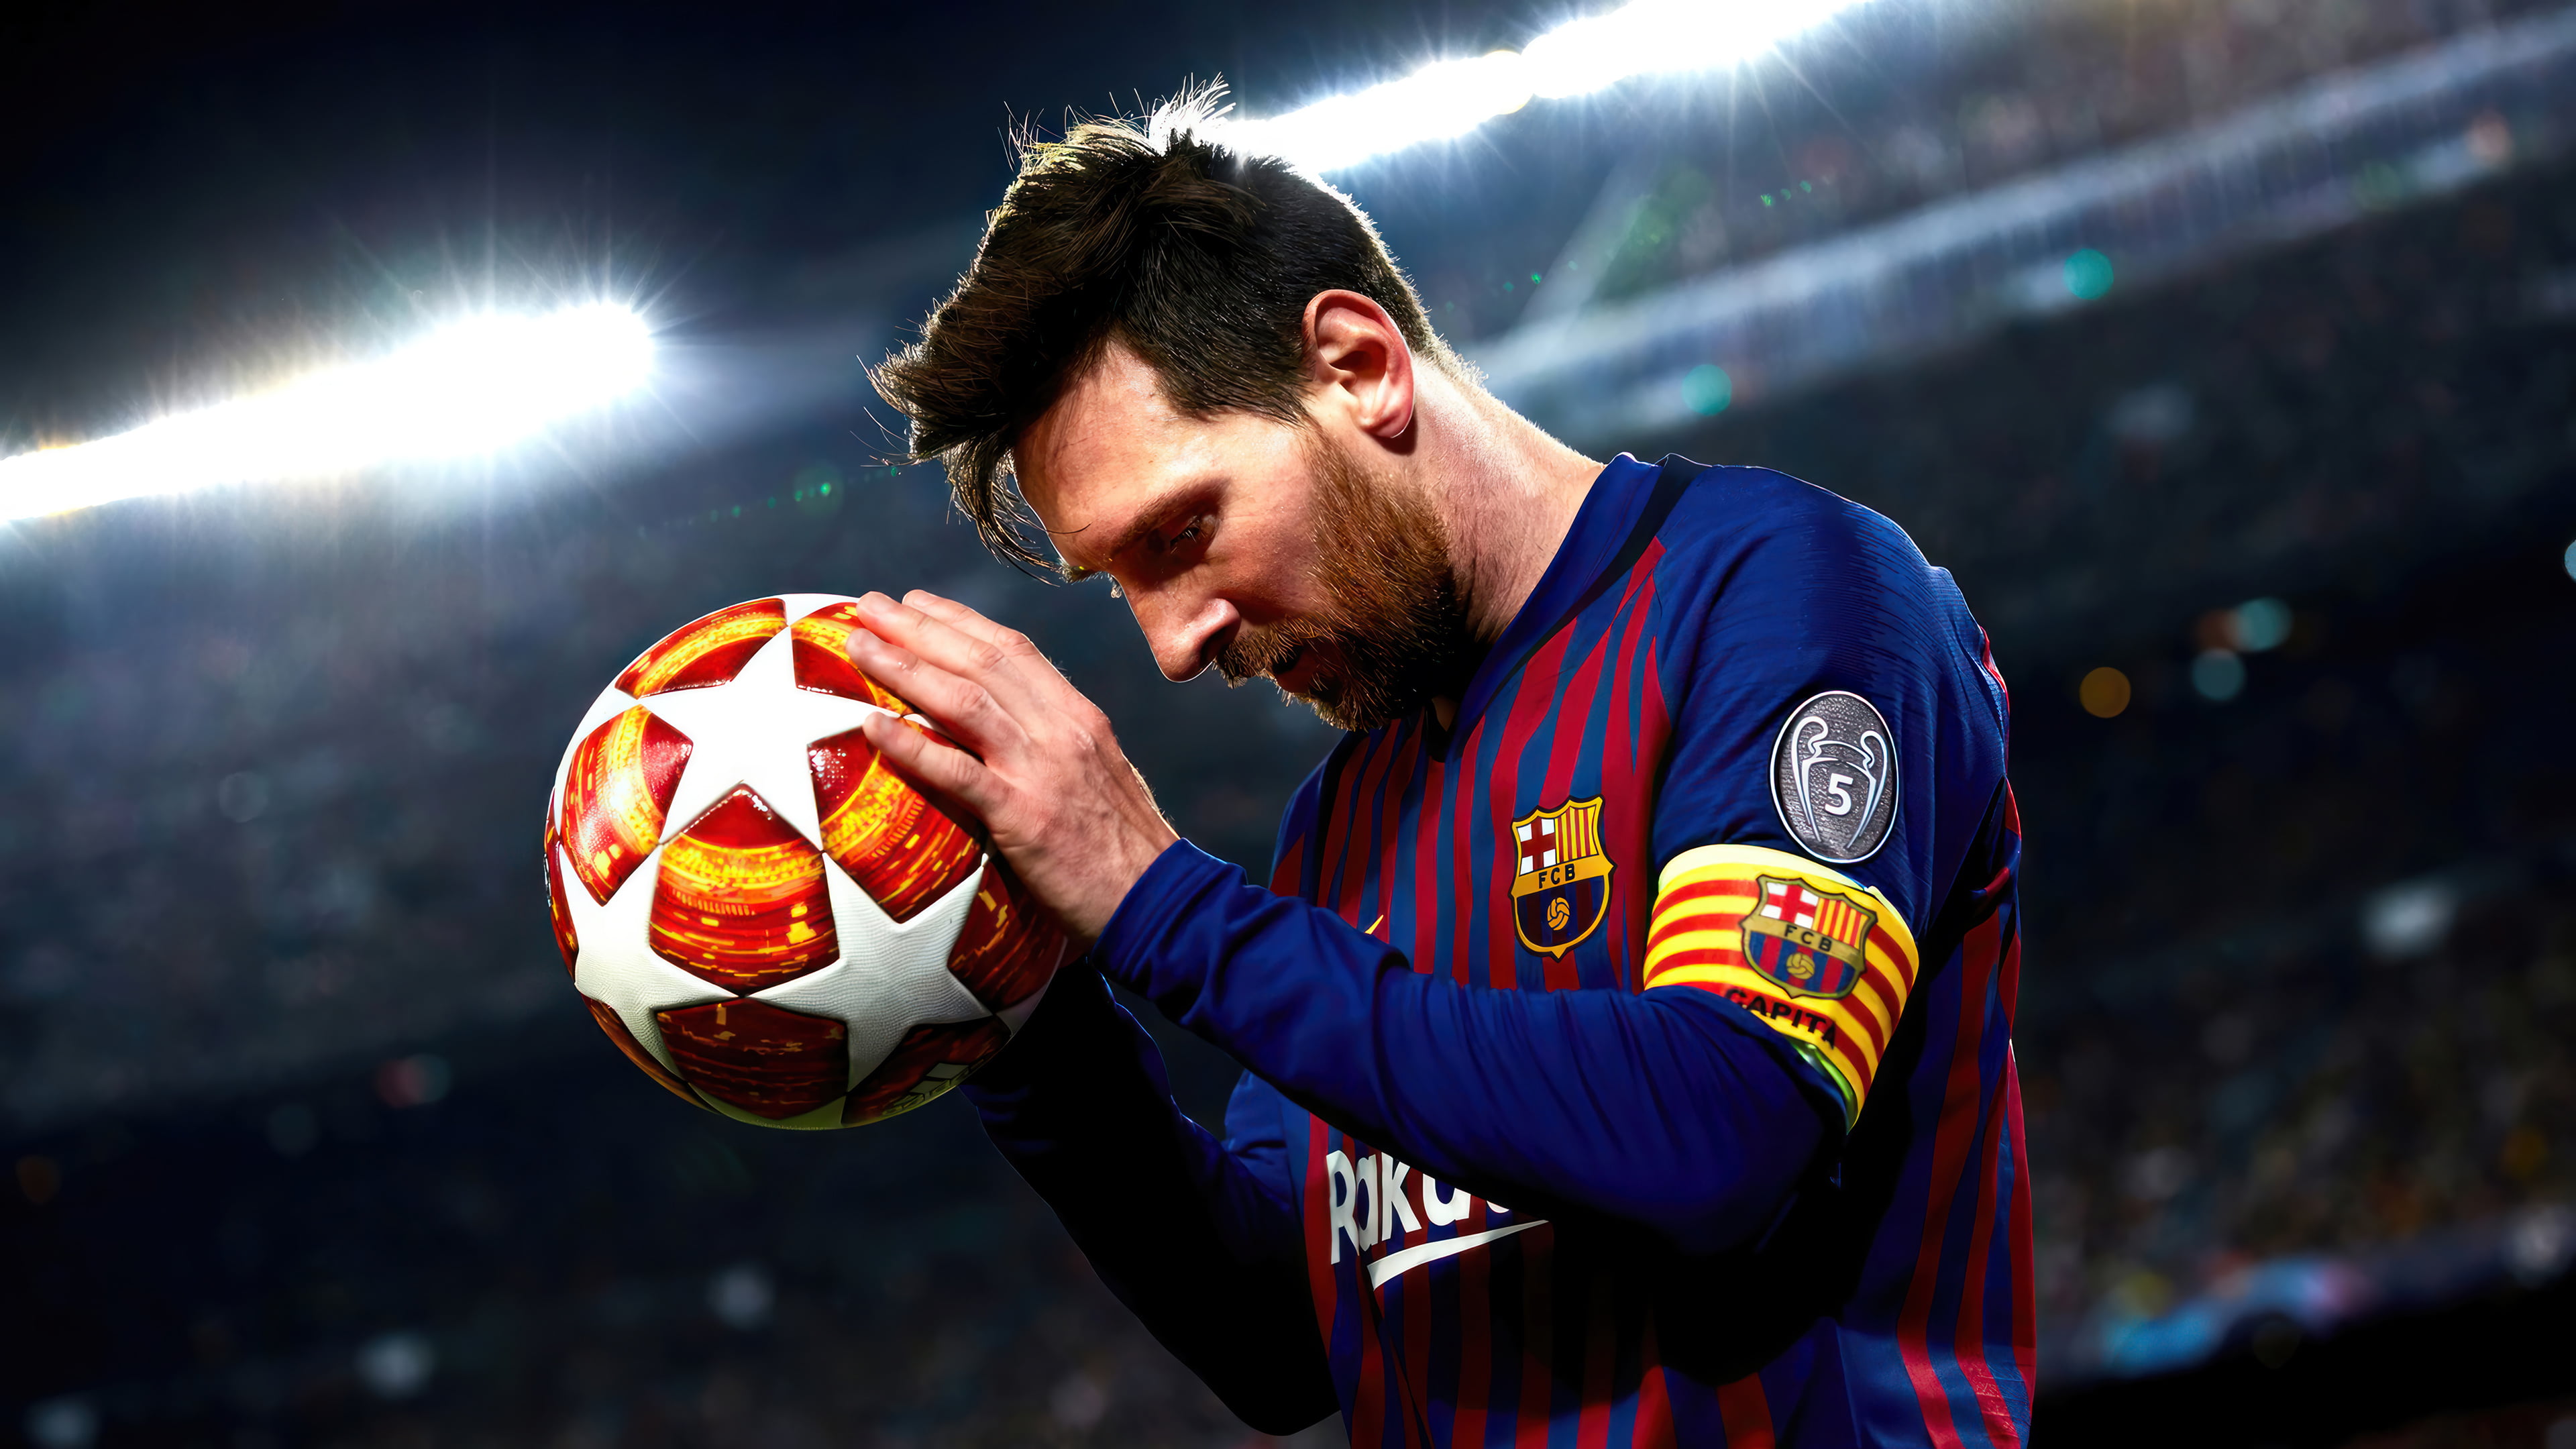 Lionel Messi 4k Celebration Wallpaper, HD Sports 4K Wallpapers, Images and  Background - Wallpapers Den